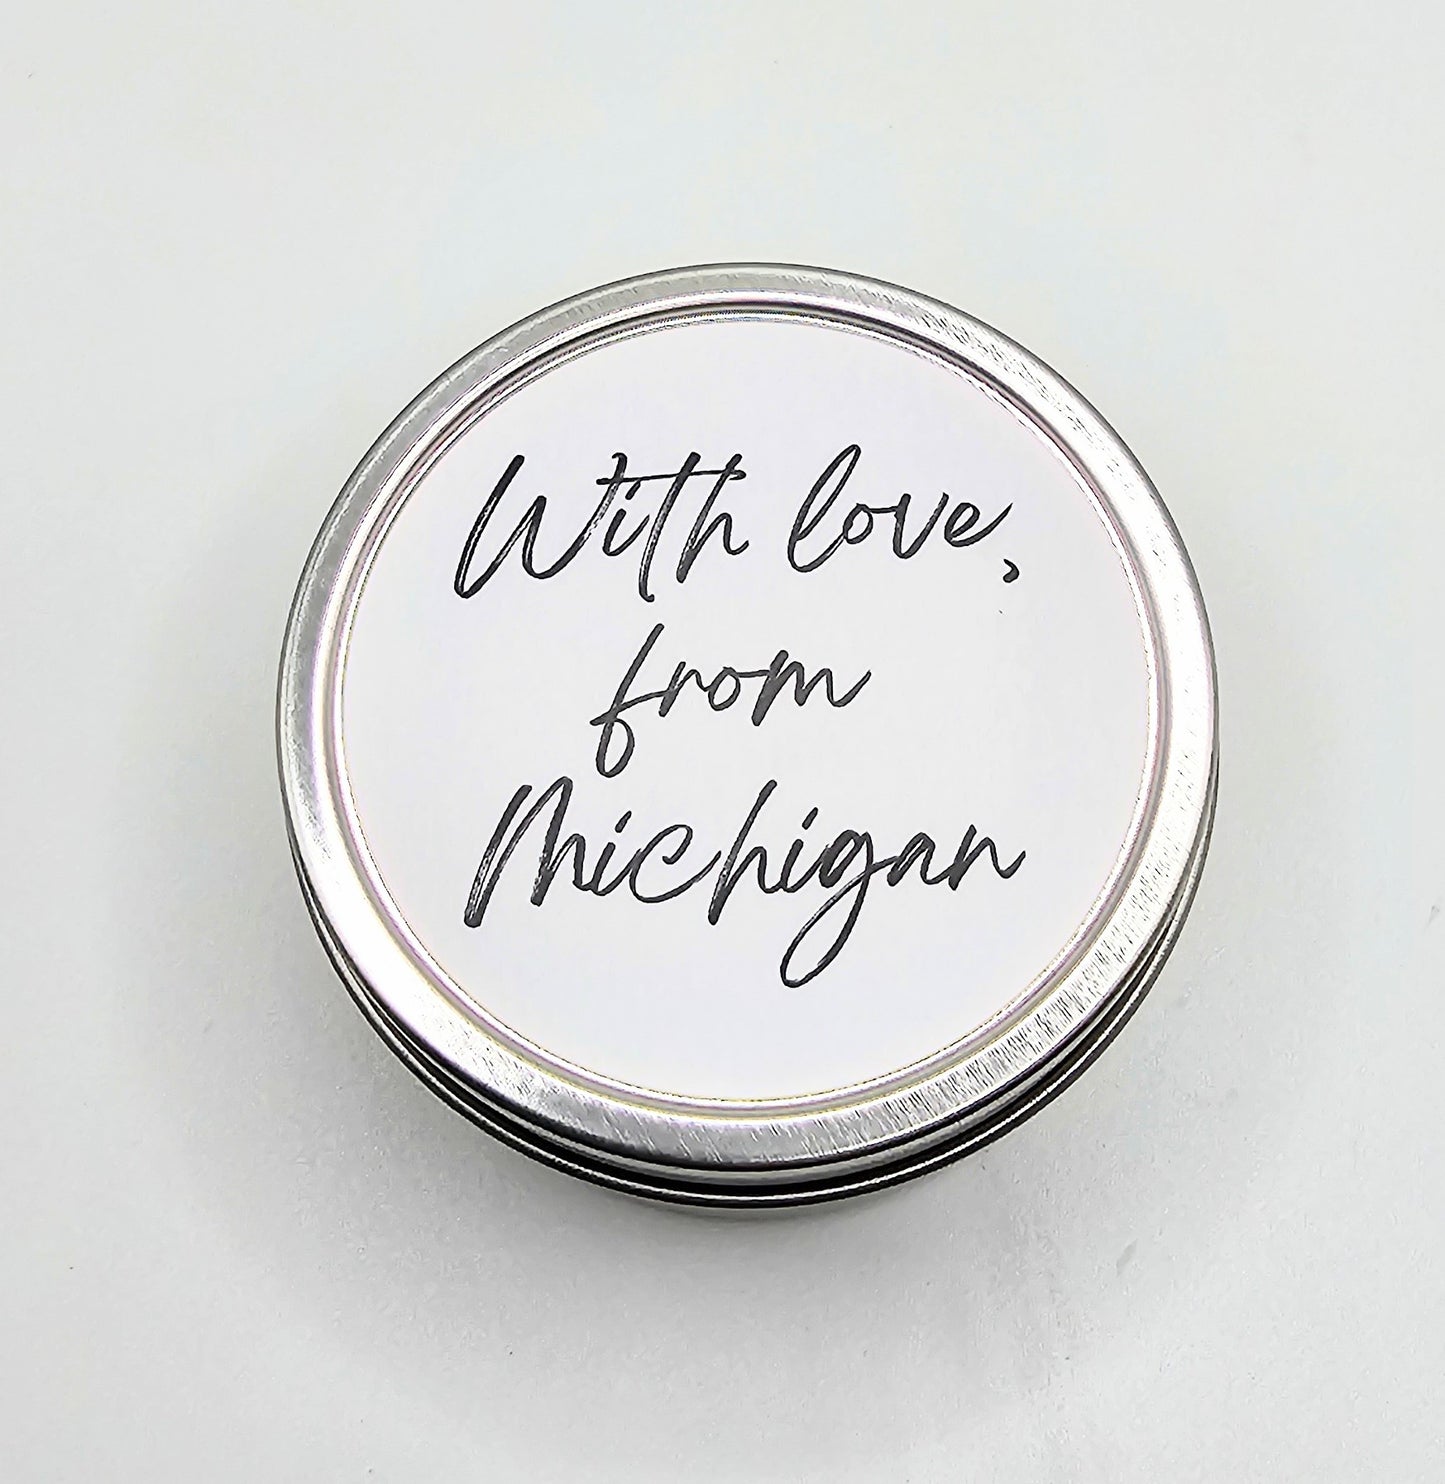 "From Michigan, with love"